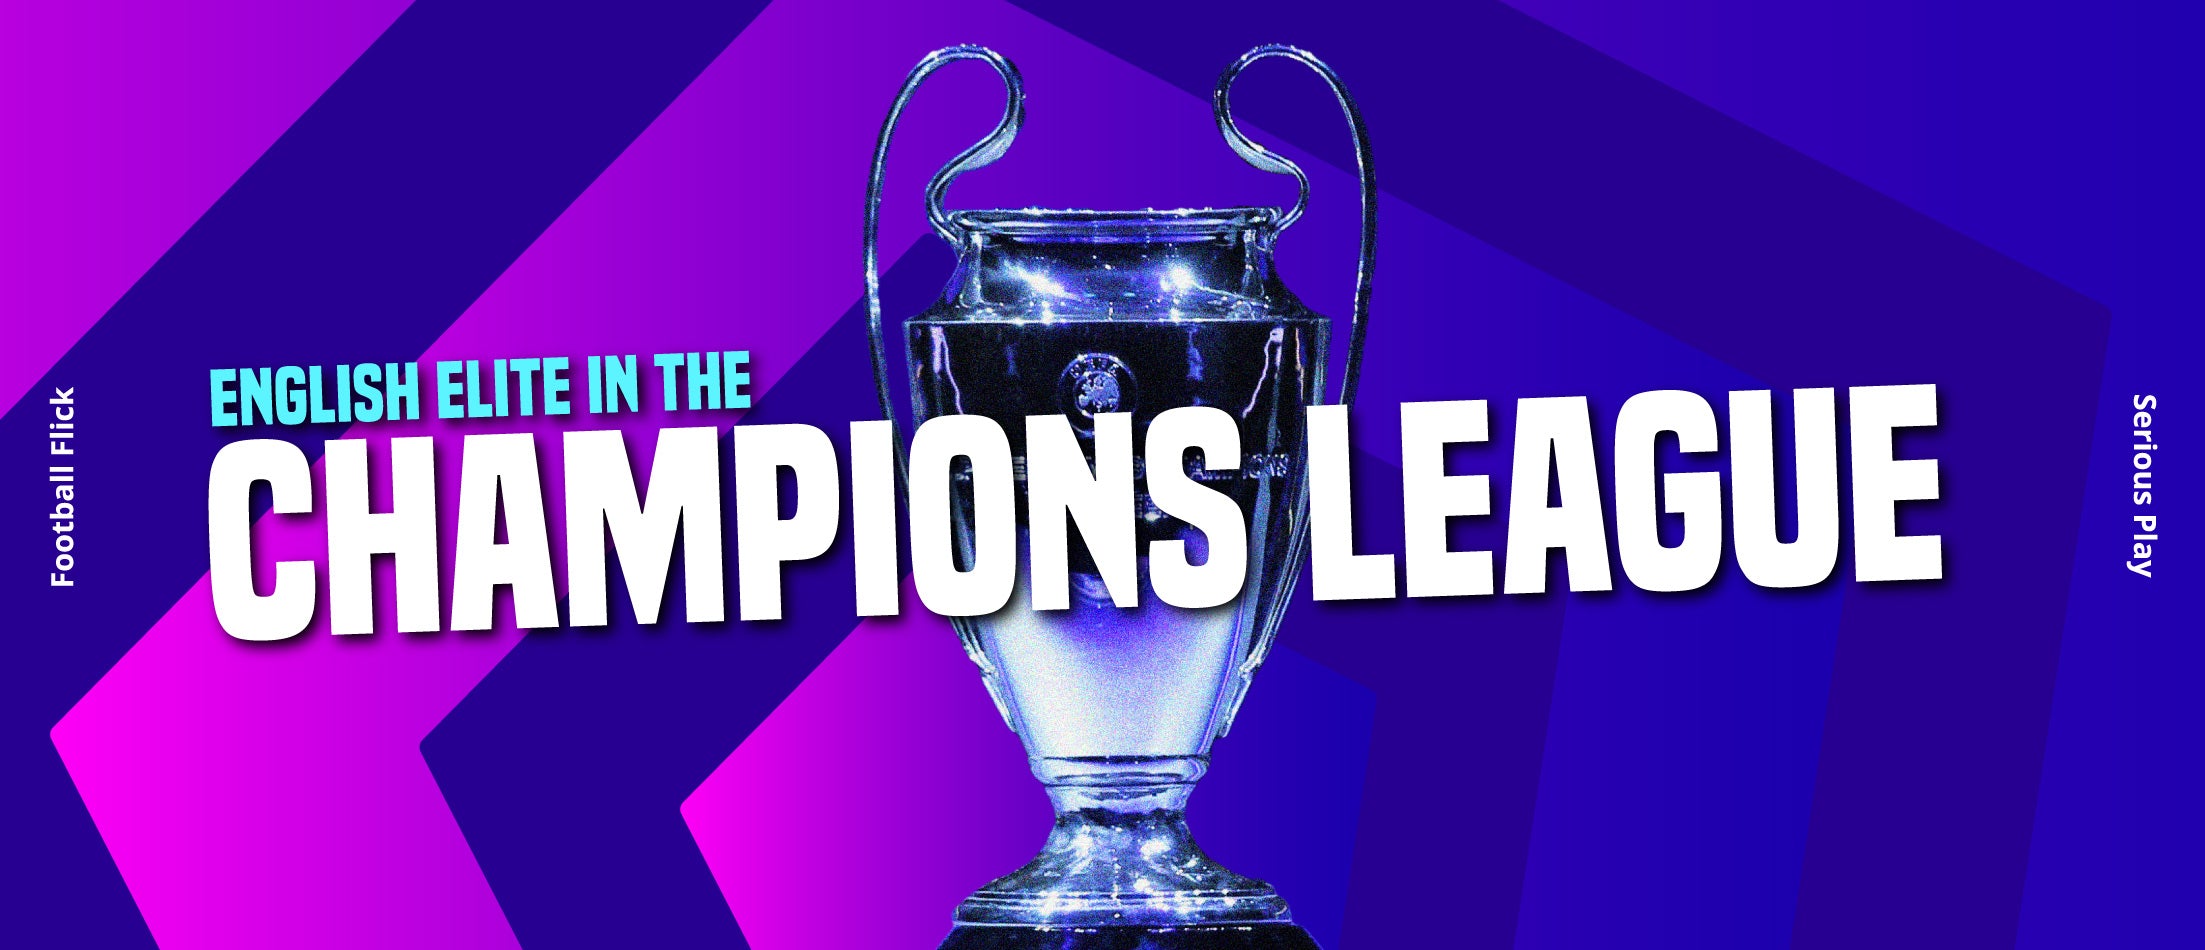 Champions League- What to expect next from the English elite